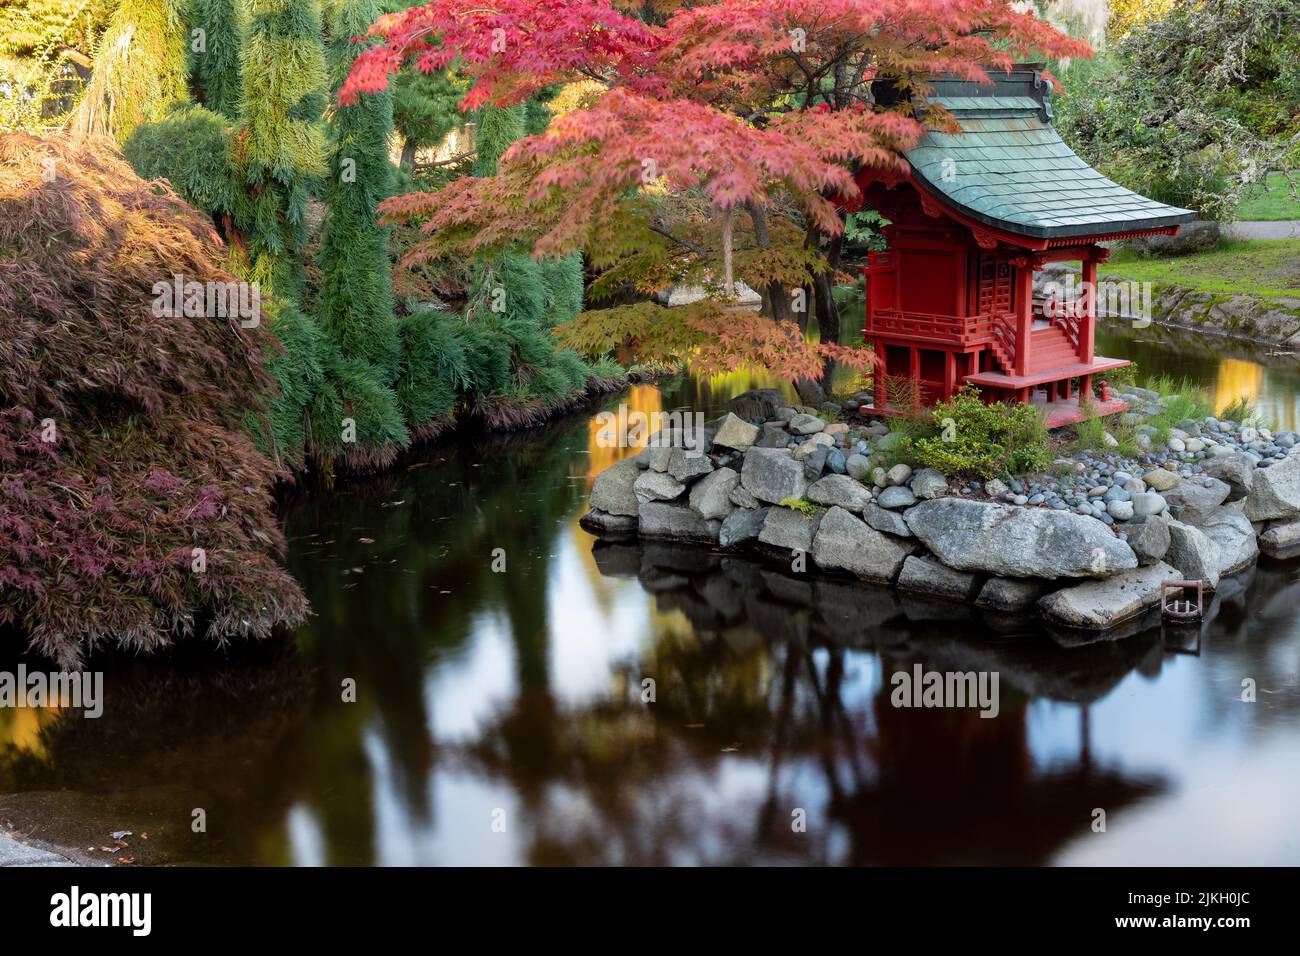 Red Pagoda in Japanese Garden Pond in Point Defiance Park, Tacoma, WA Stock Photo